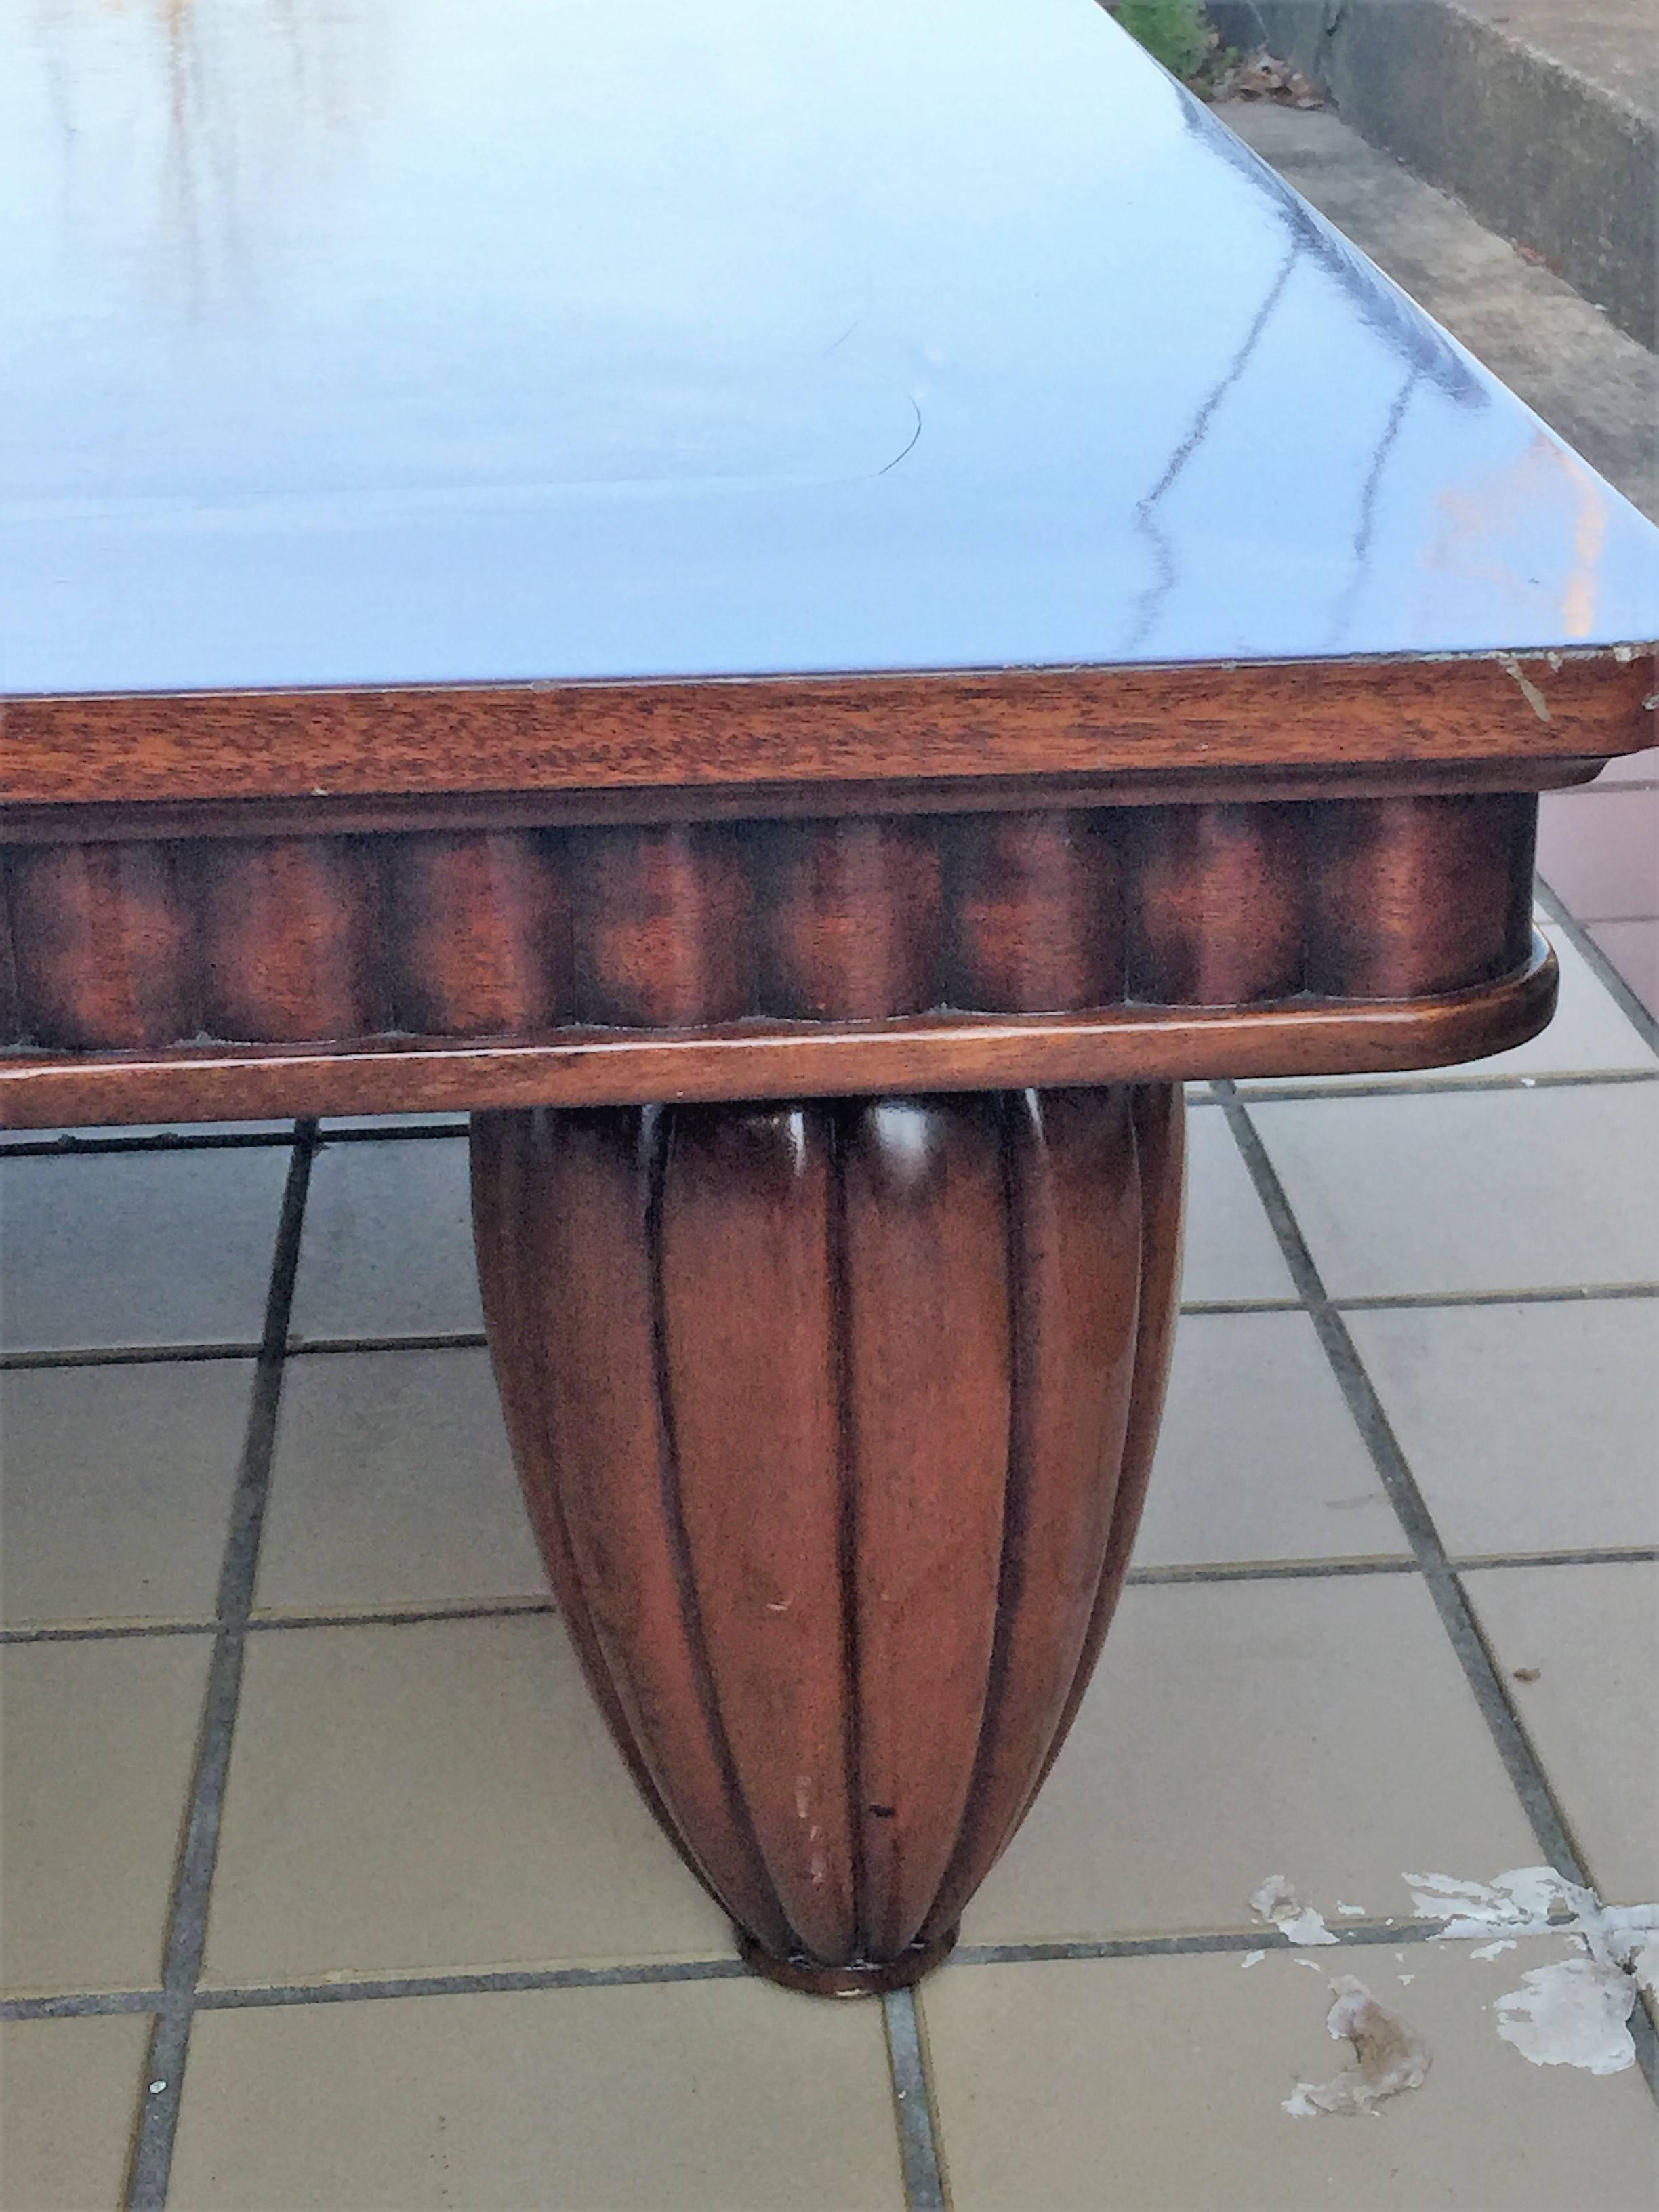 Massive beautiful Art Deco style mahogany and burled wood centre inlay coffee table with fluted ovoid feet and square design trim in the manner of French Art Deco furniture master Emile-Jacques Ruhlmann.In Original Vintage Condition with some